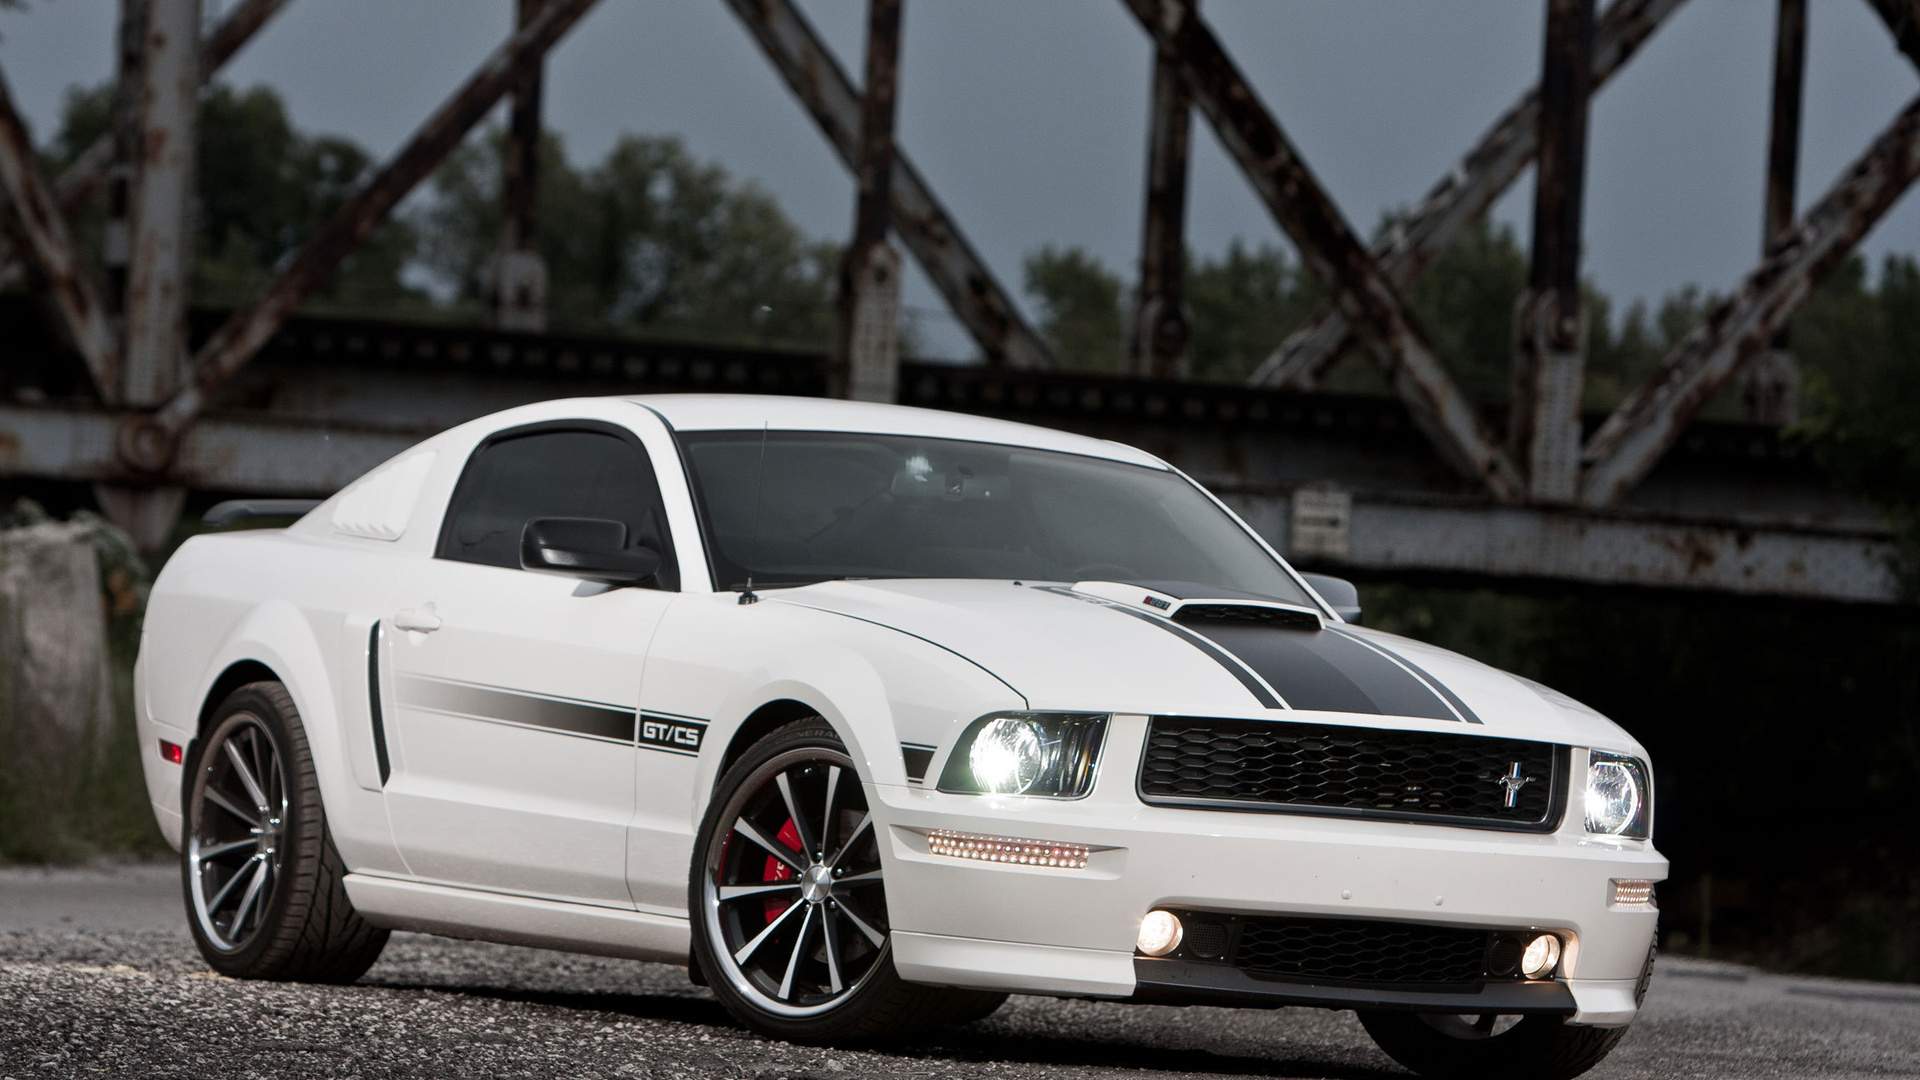 , white, , gtcs, Ford, , , mustang,  